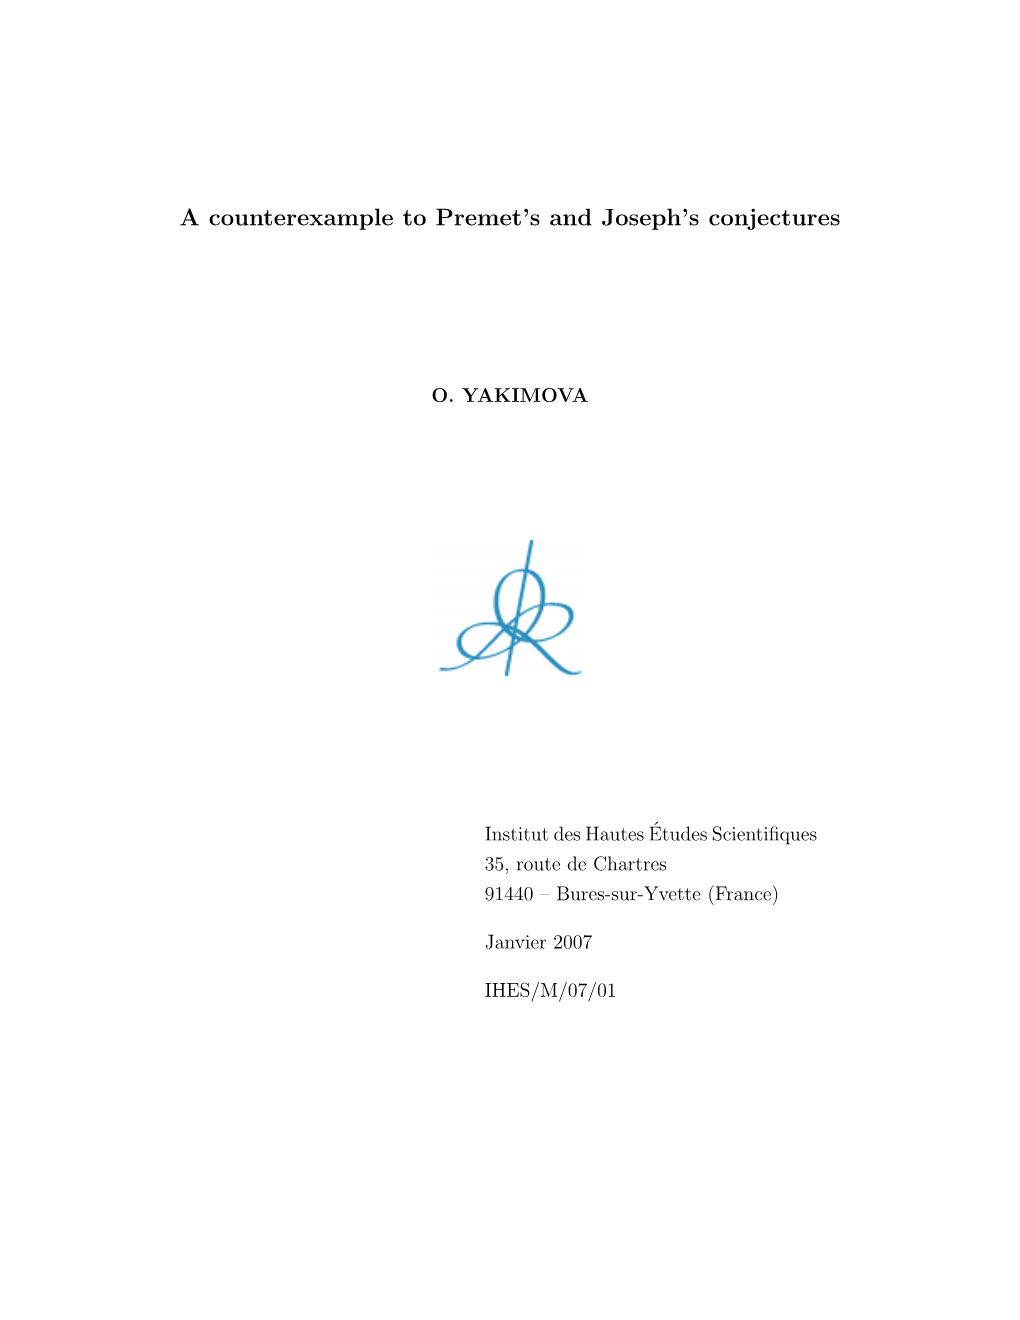 A Counterexample to Premet's and Joseph's Conjectures